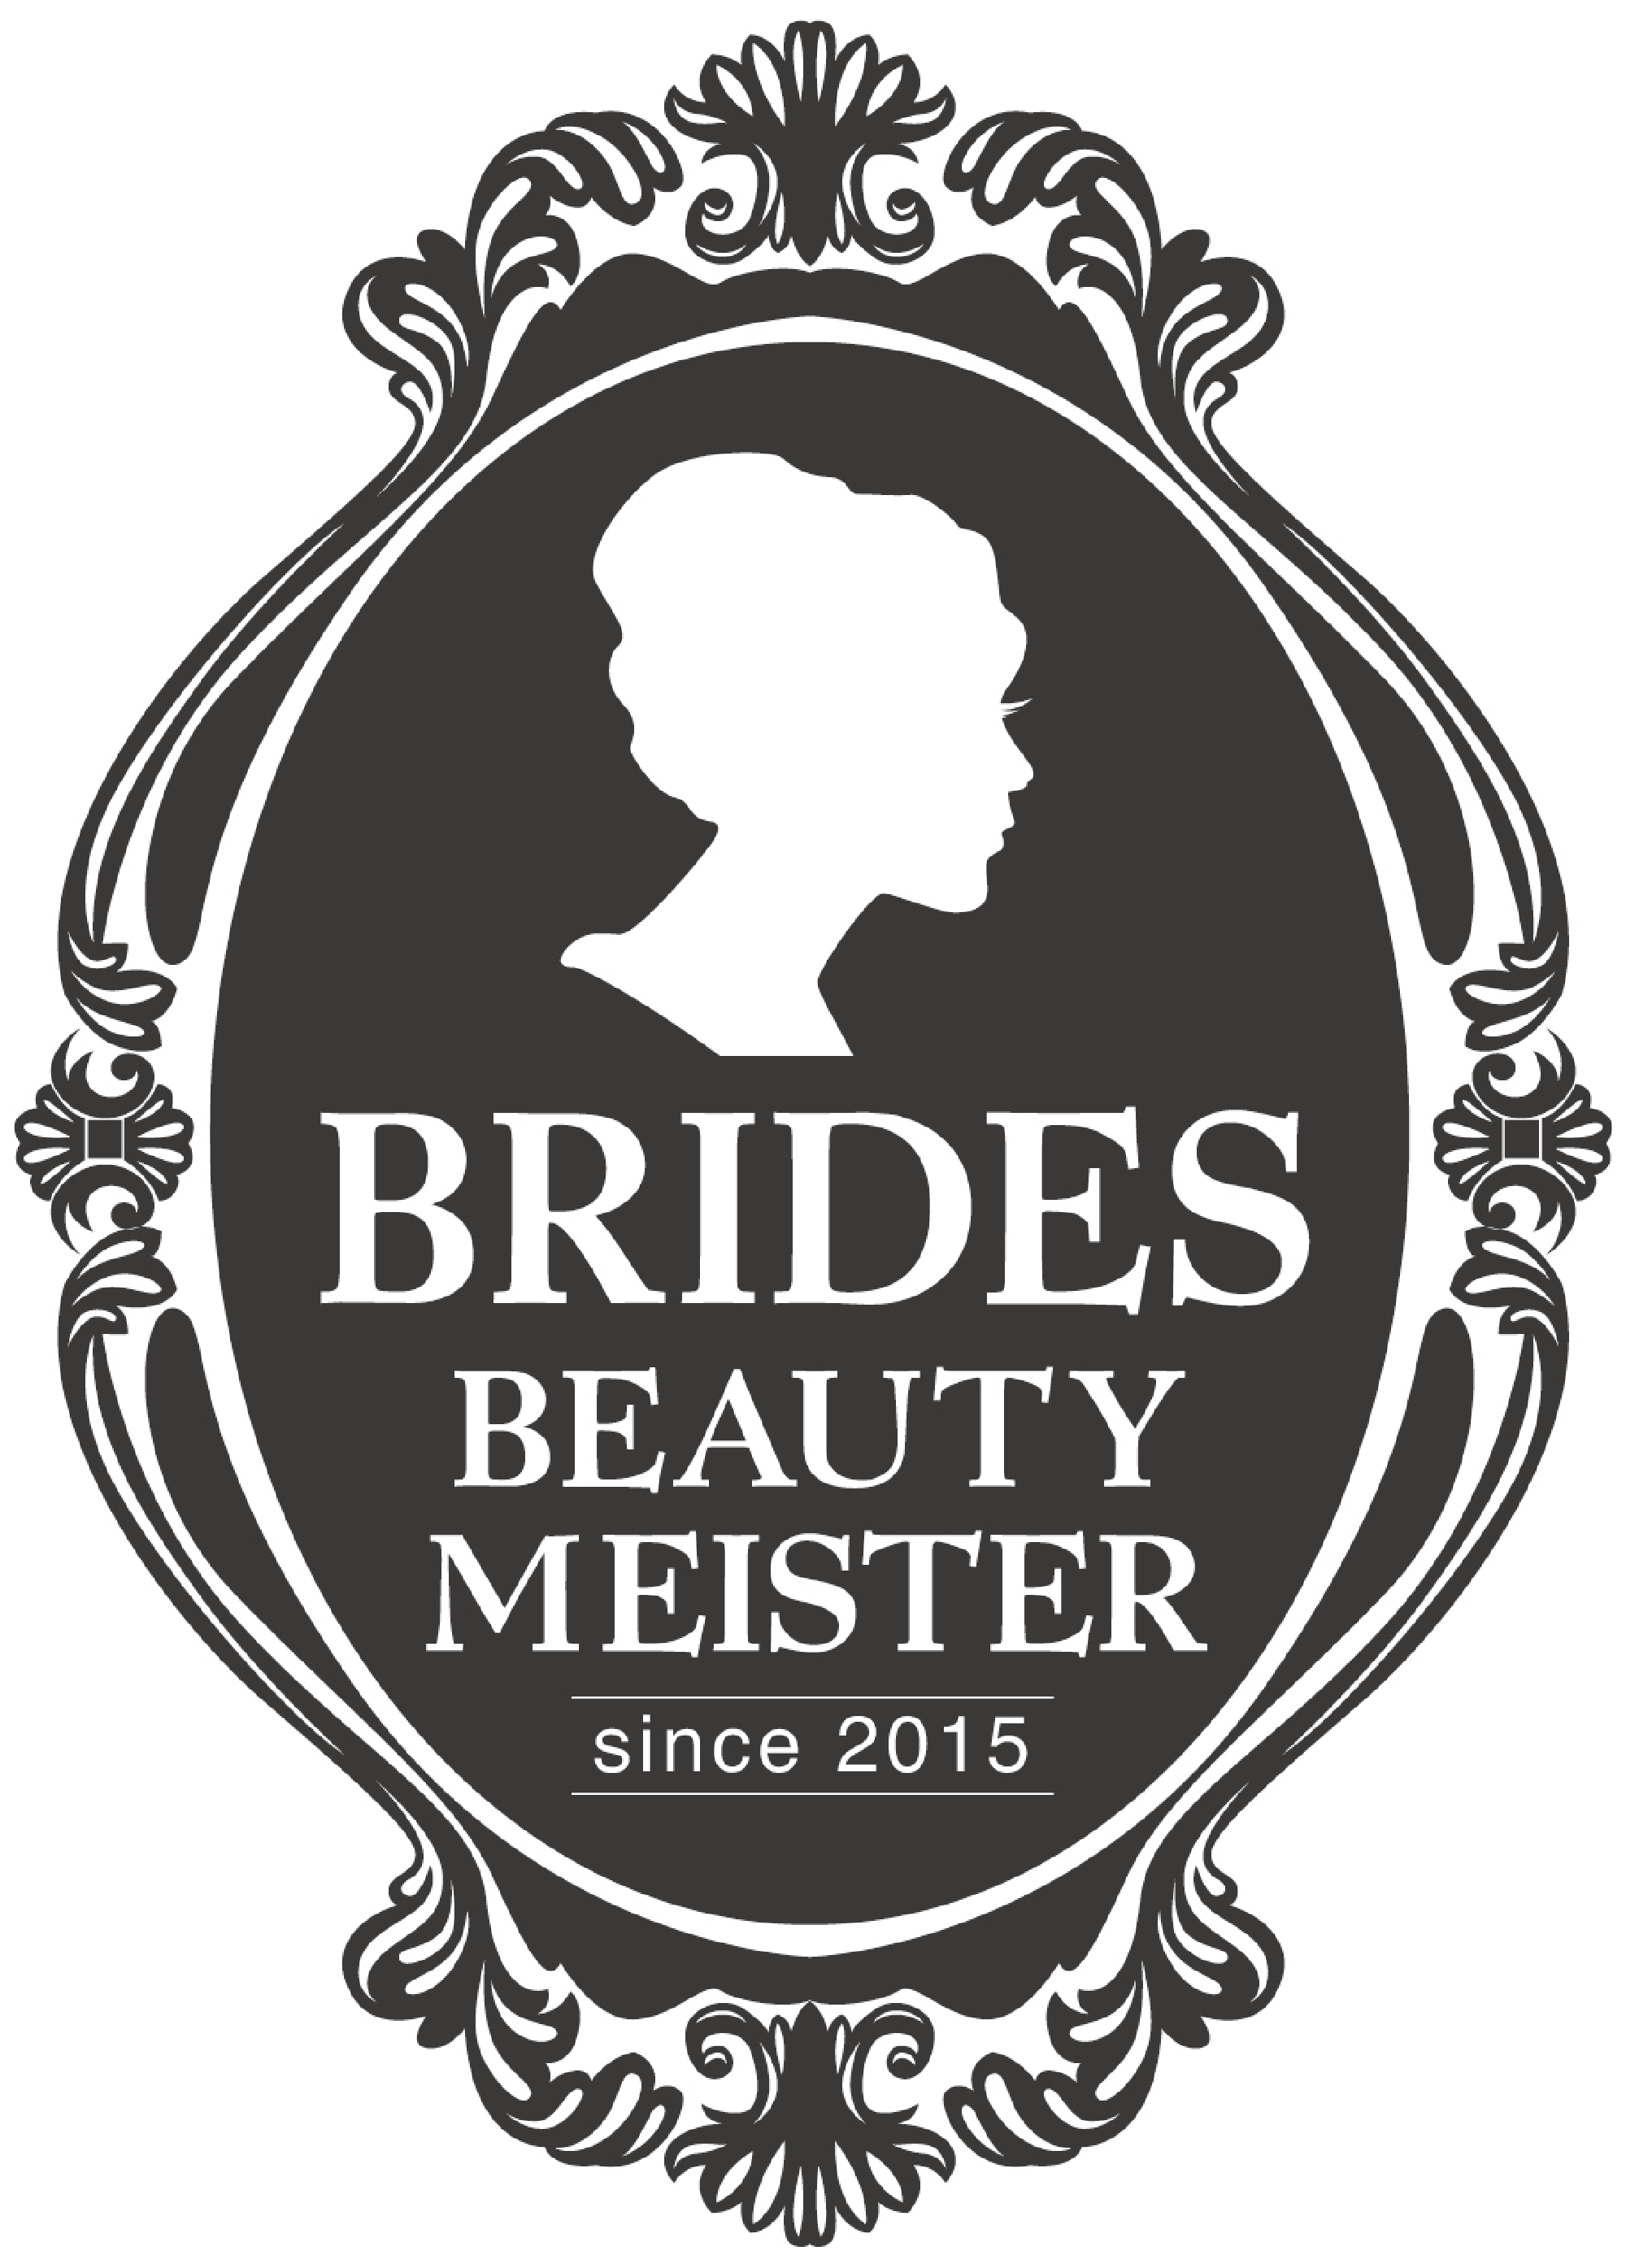 BRIDES BEAUTY MEISTER